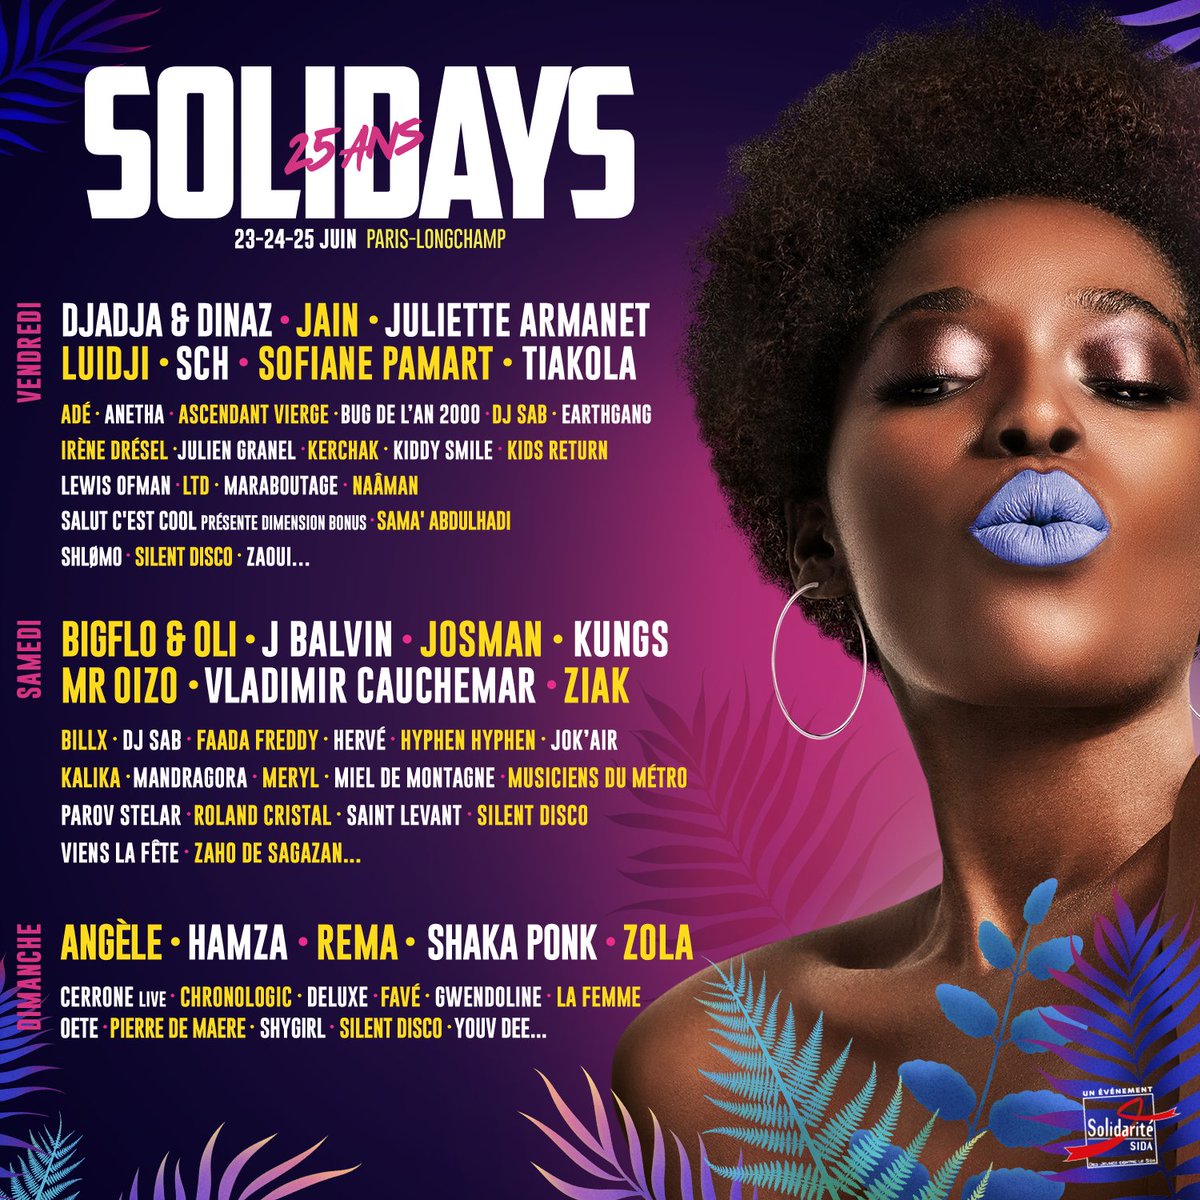 Festival Solidays (@Solidays) / Twitter